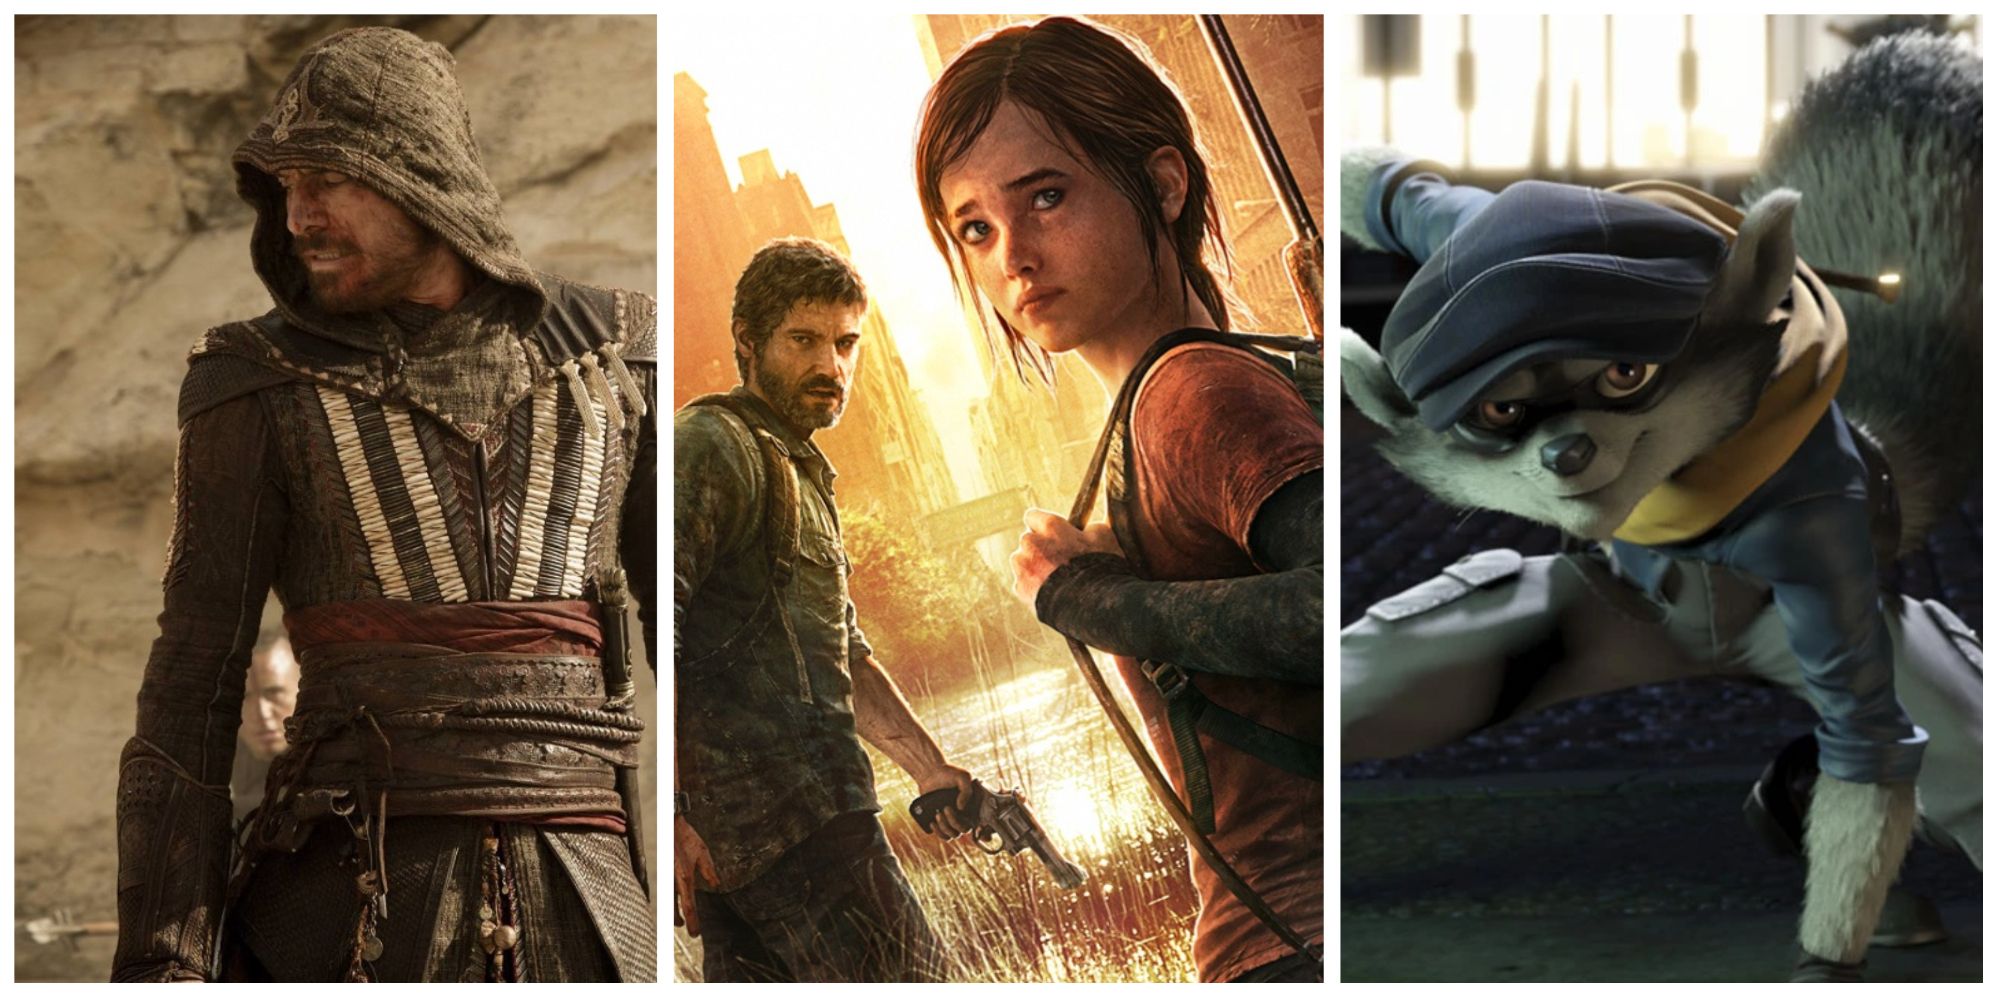 assassin's creed movie, the last of us, sly cooper movie